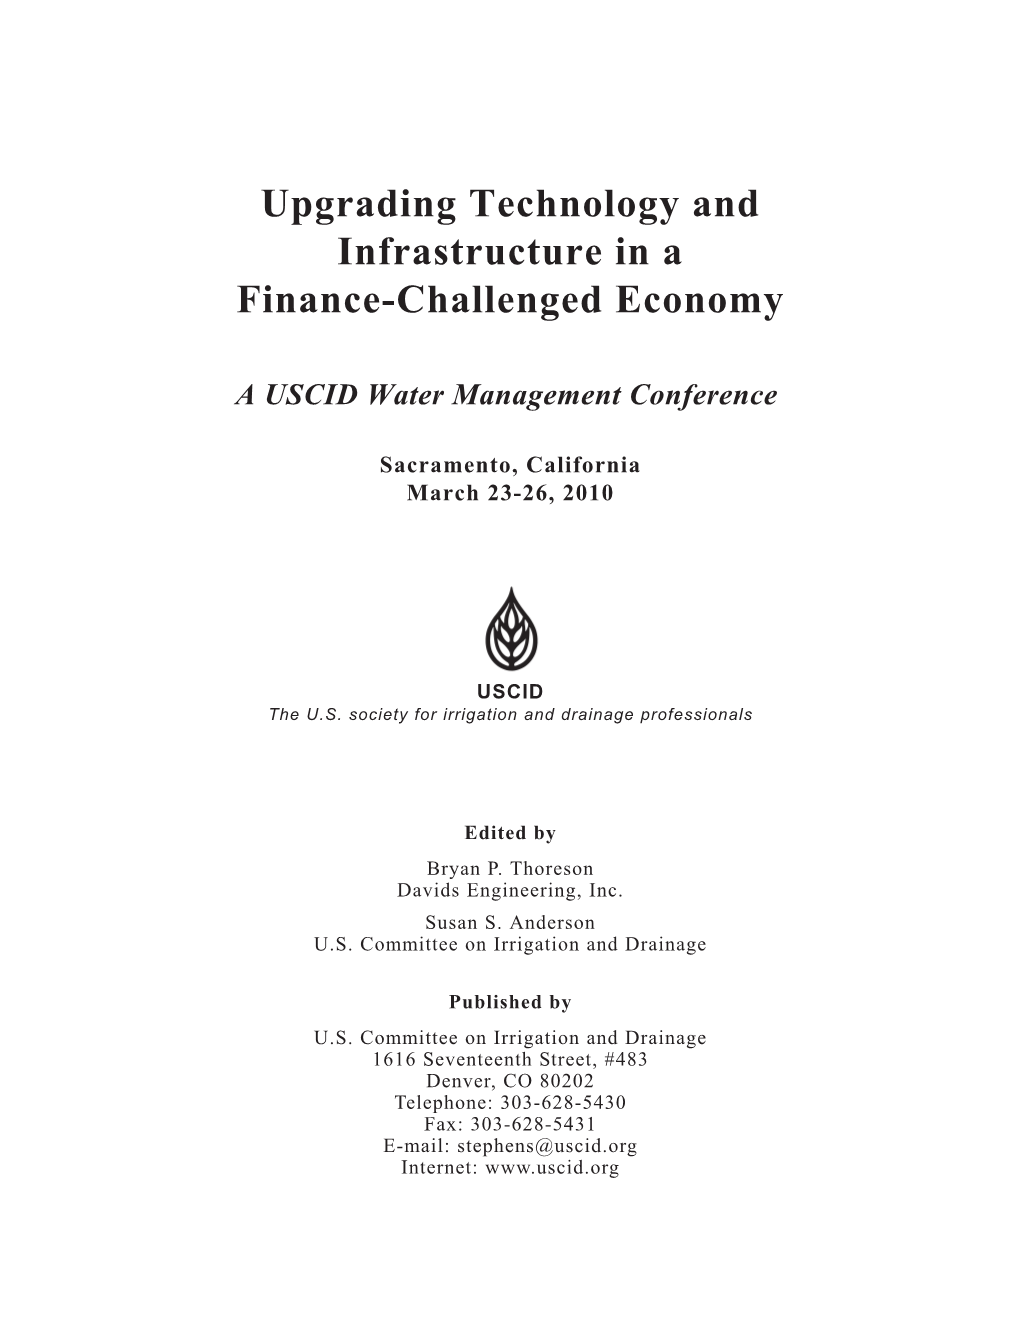 Upgrading Technology and Infrastructure in a Finance-Challenged Economy